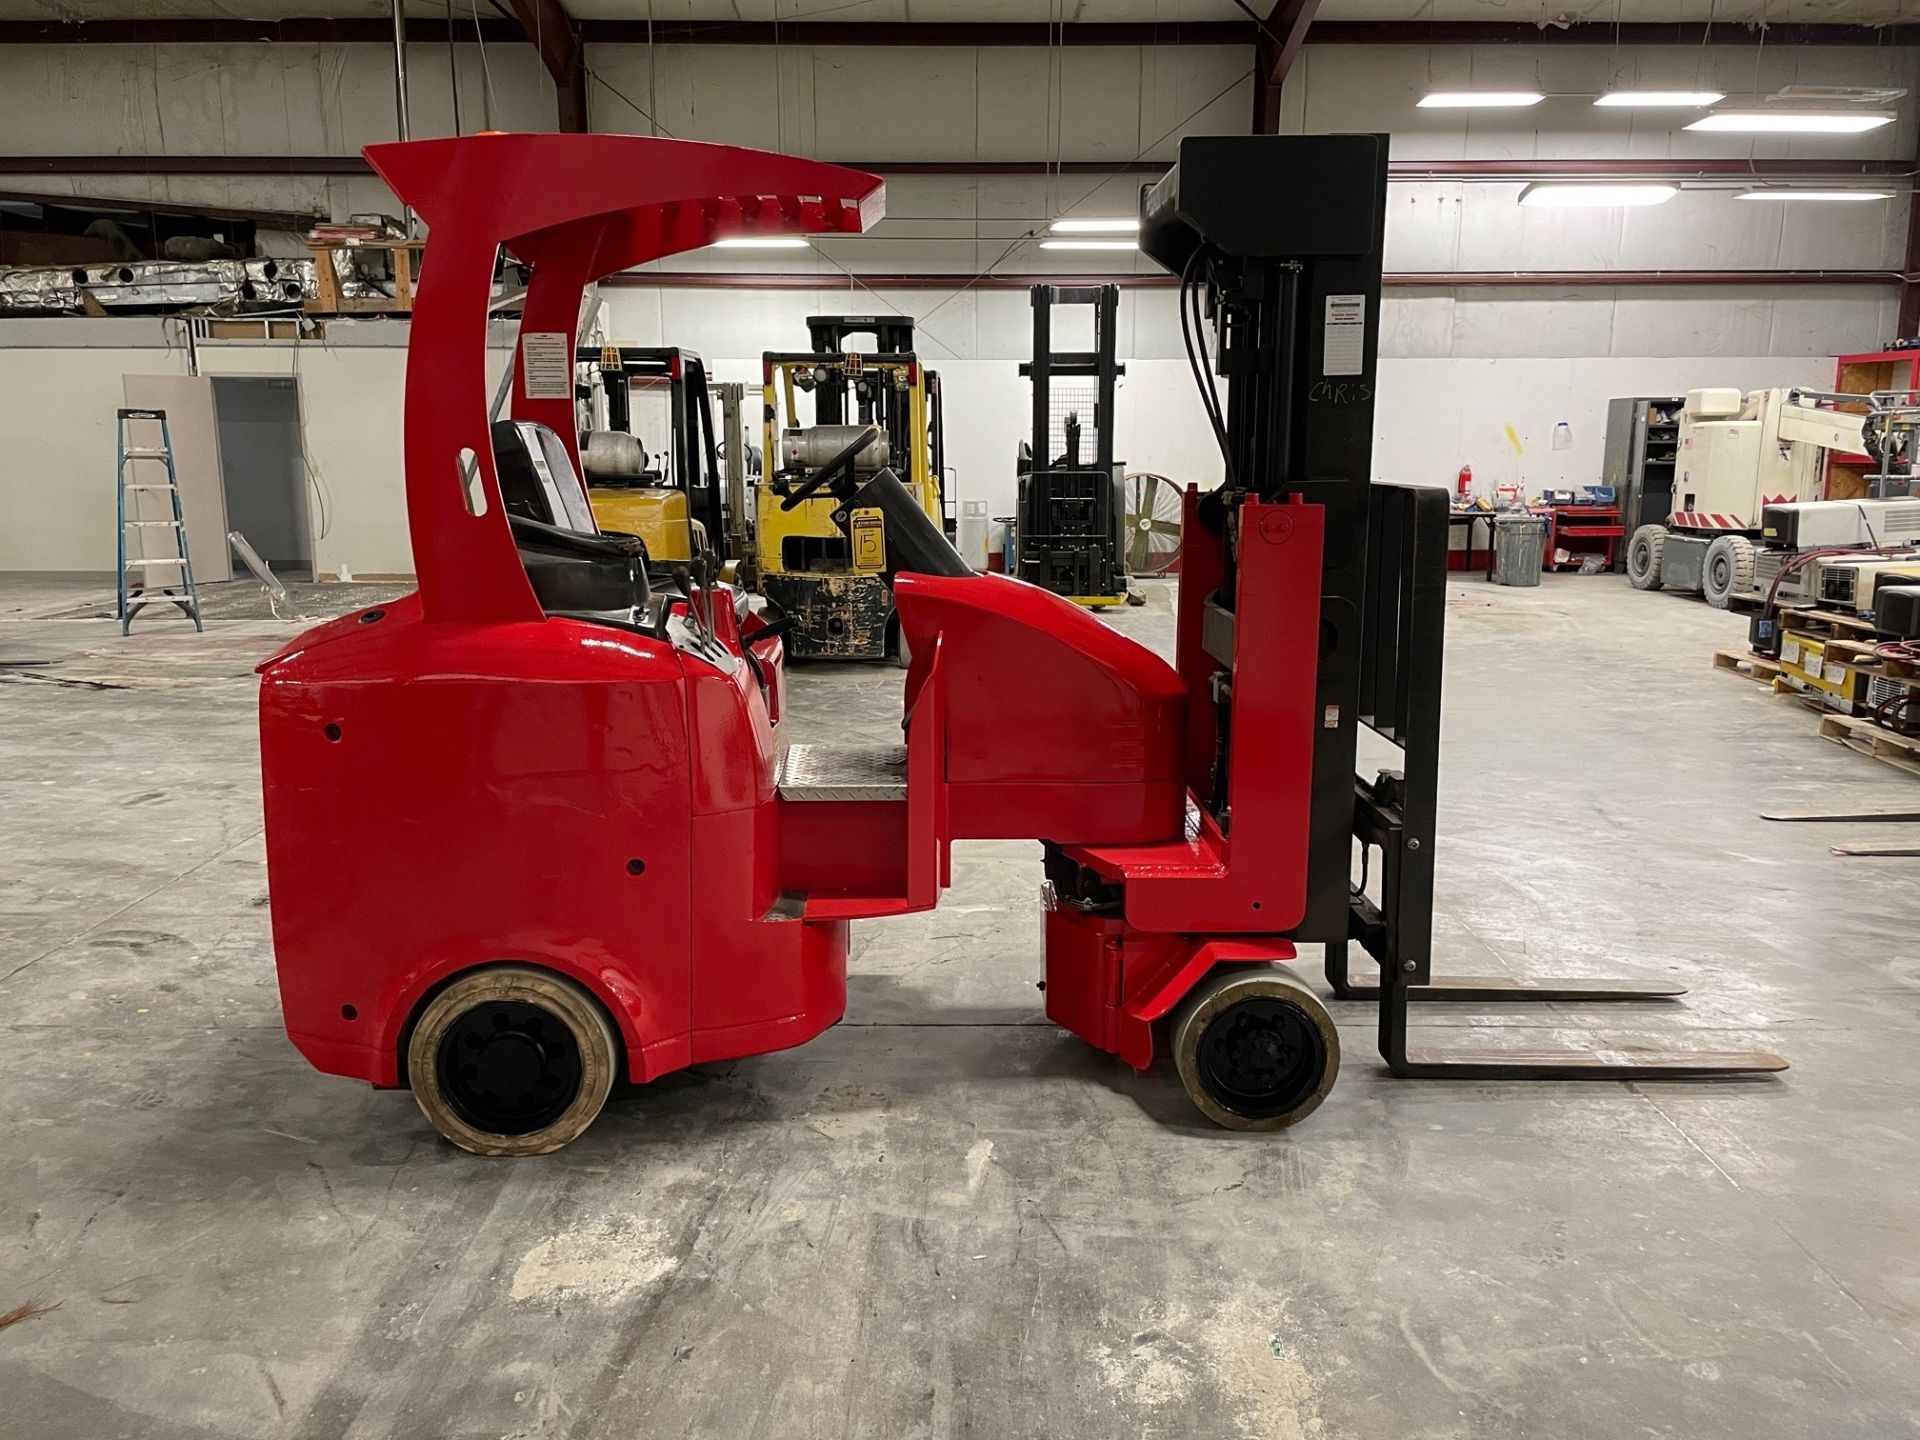 FLEXI VERY NARROW AISLE 3,000 LB. CAPACITY FORKLIFT, MODEL G4, S/N NA02610 Z48, WITH 48-VOLT BATTERY - Image 6 of 10